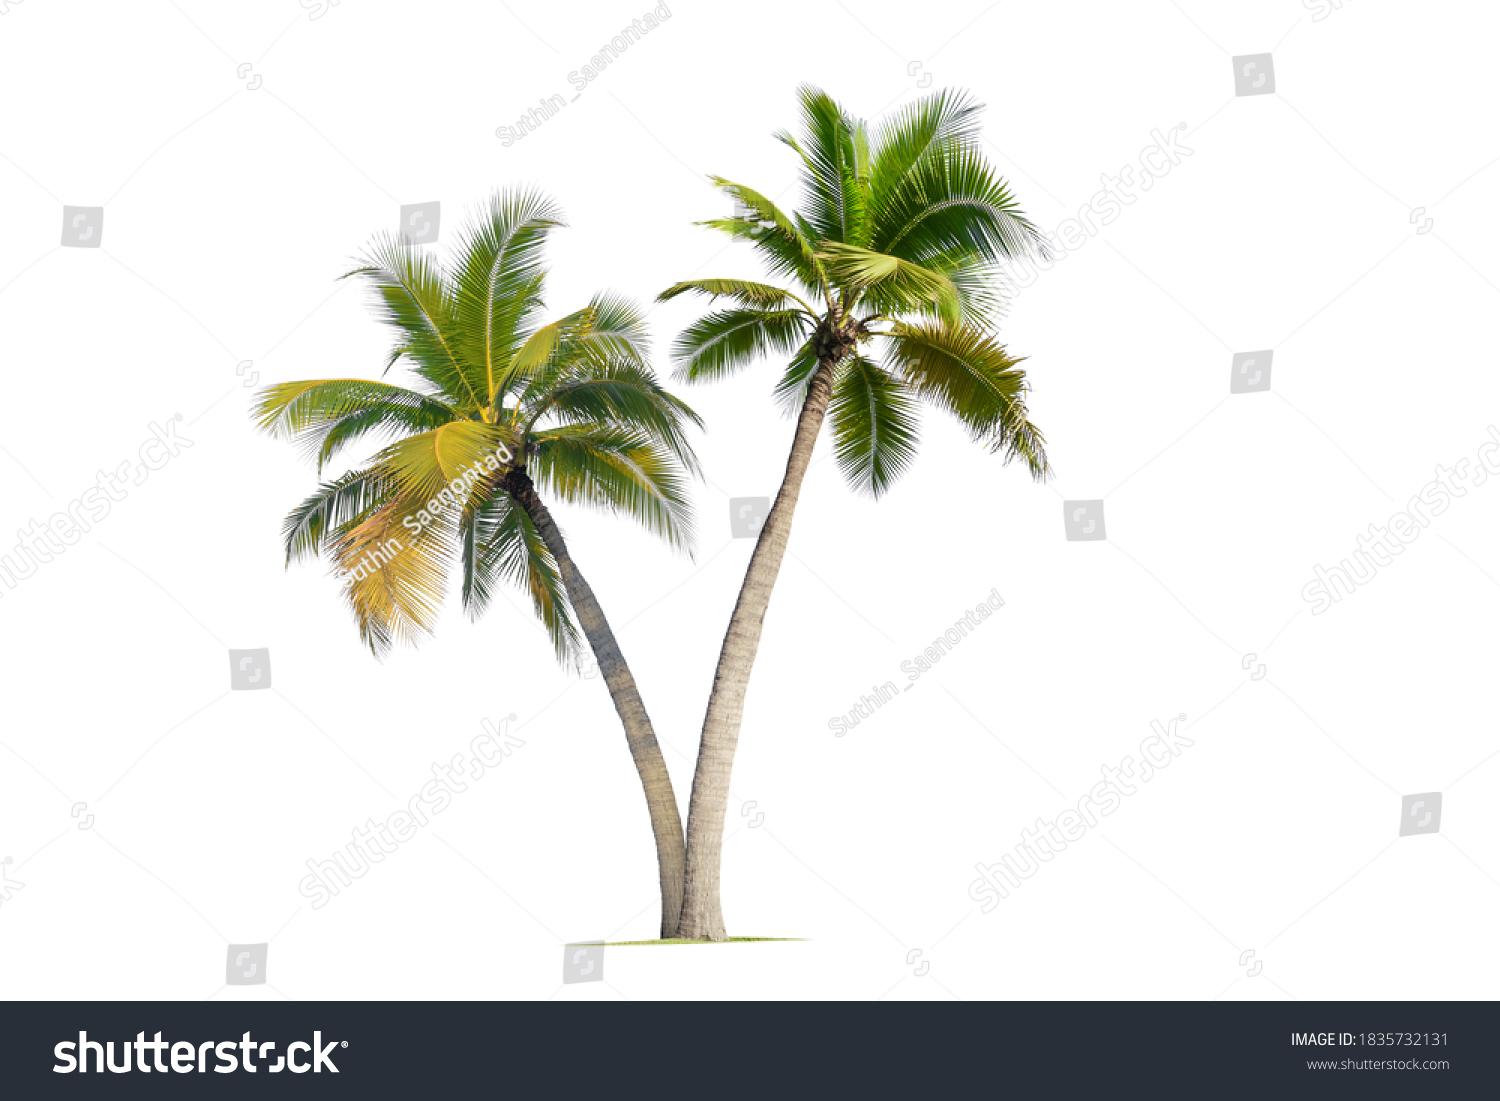 Coconut palm tree isolated on white background. #1835732131